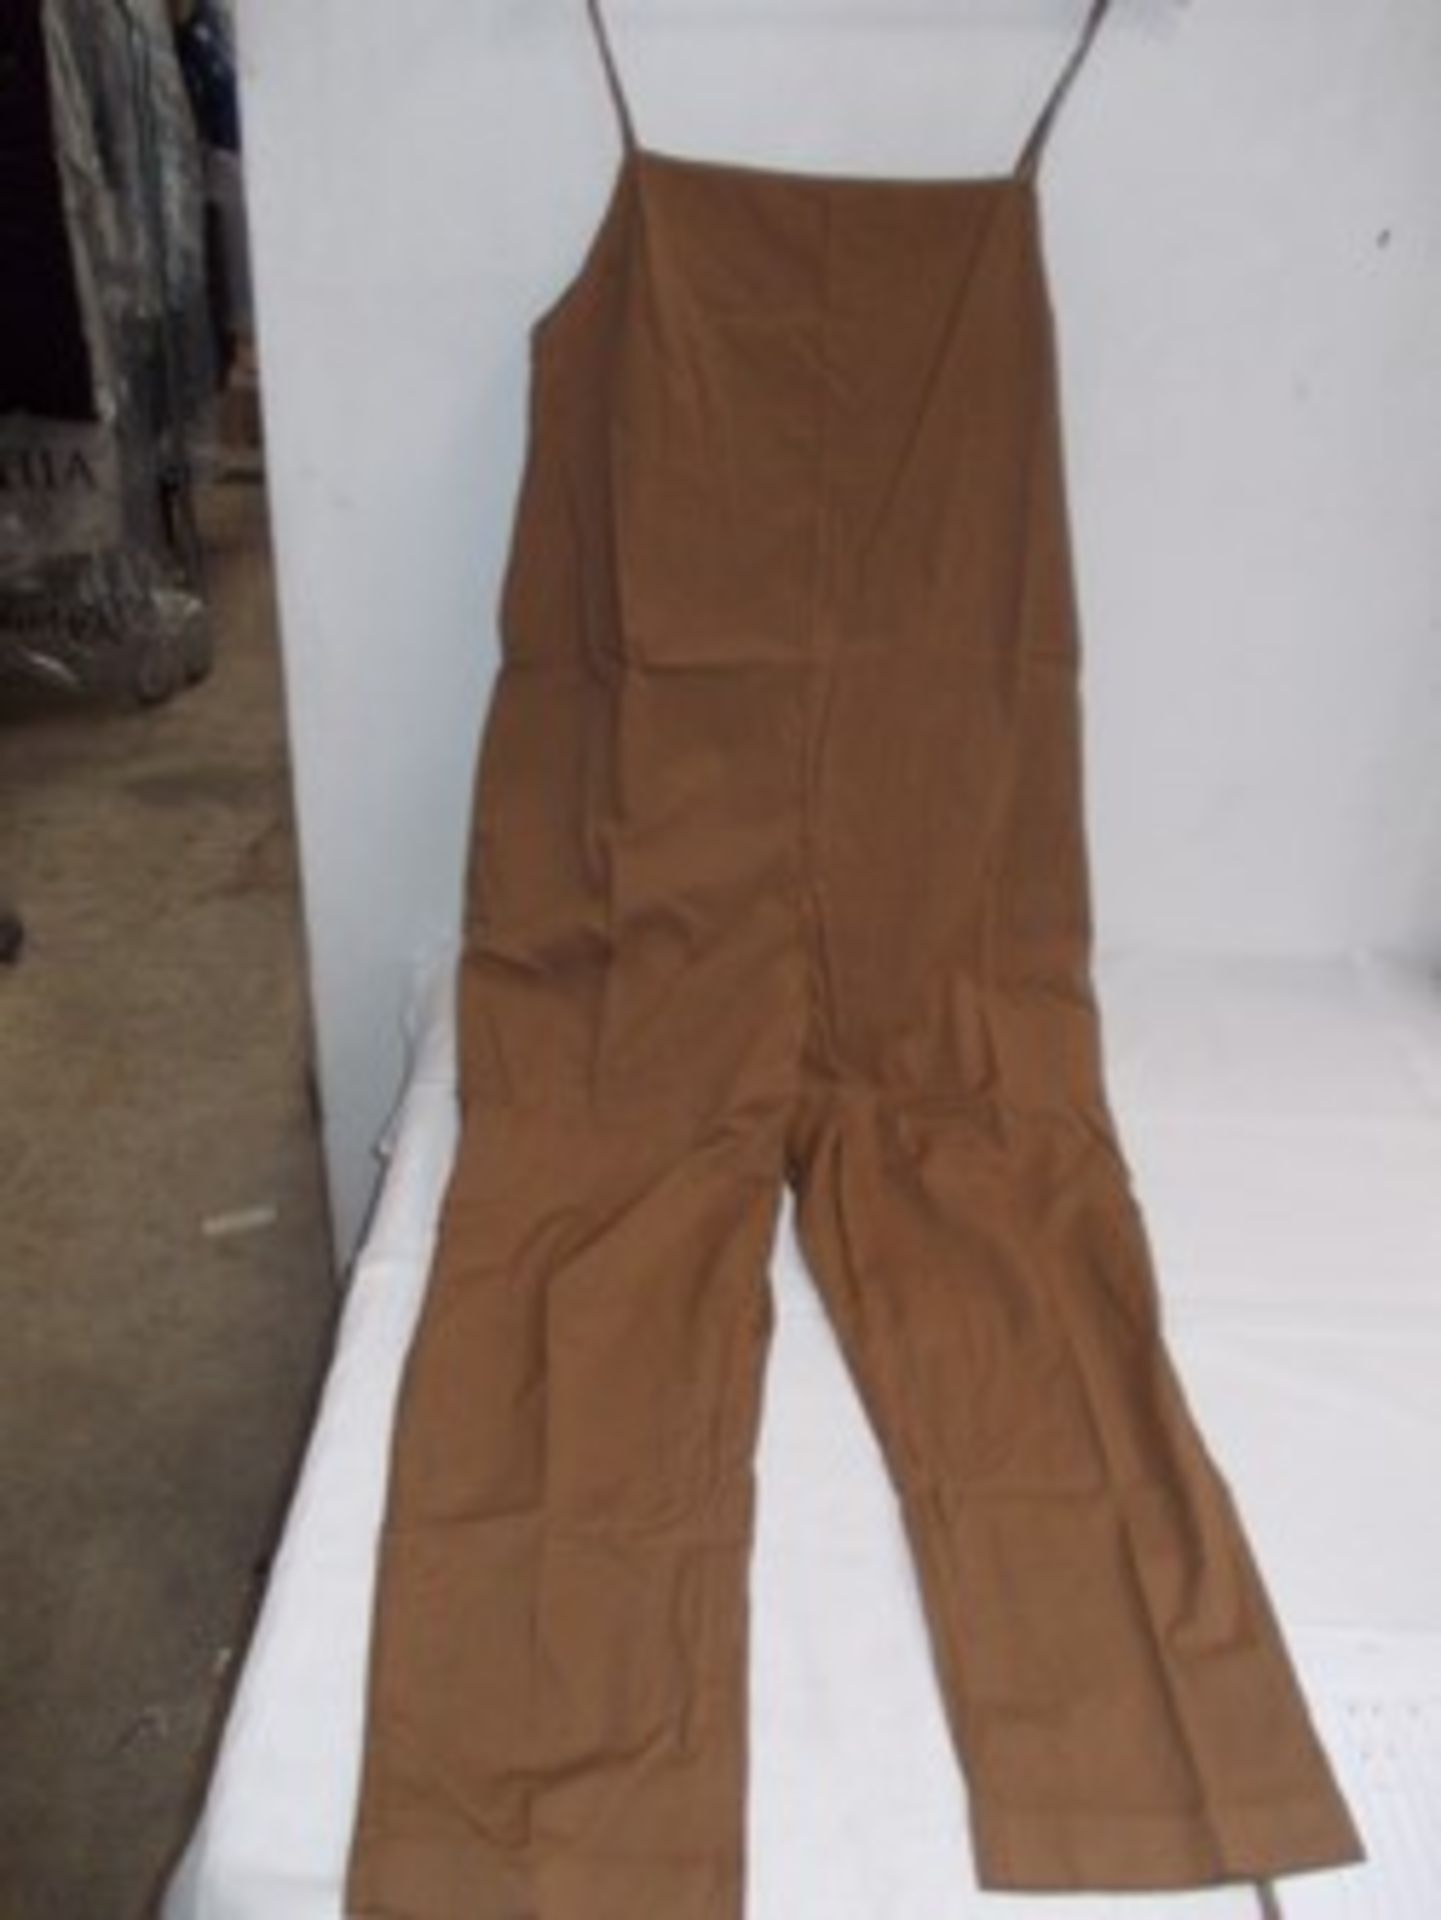 2 x Mama B jumpsuits, style Loto Thanim, 1 x size S and 1 x size M - New with tags (E3B)